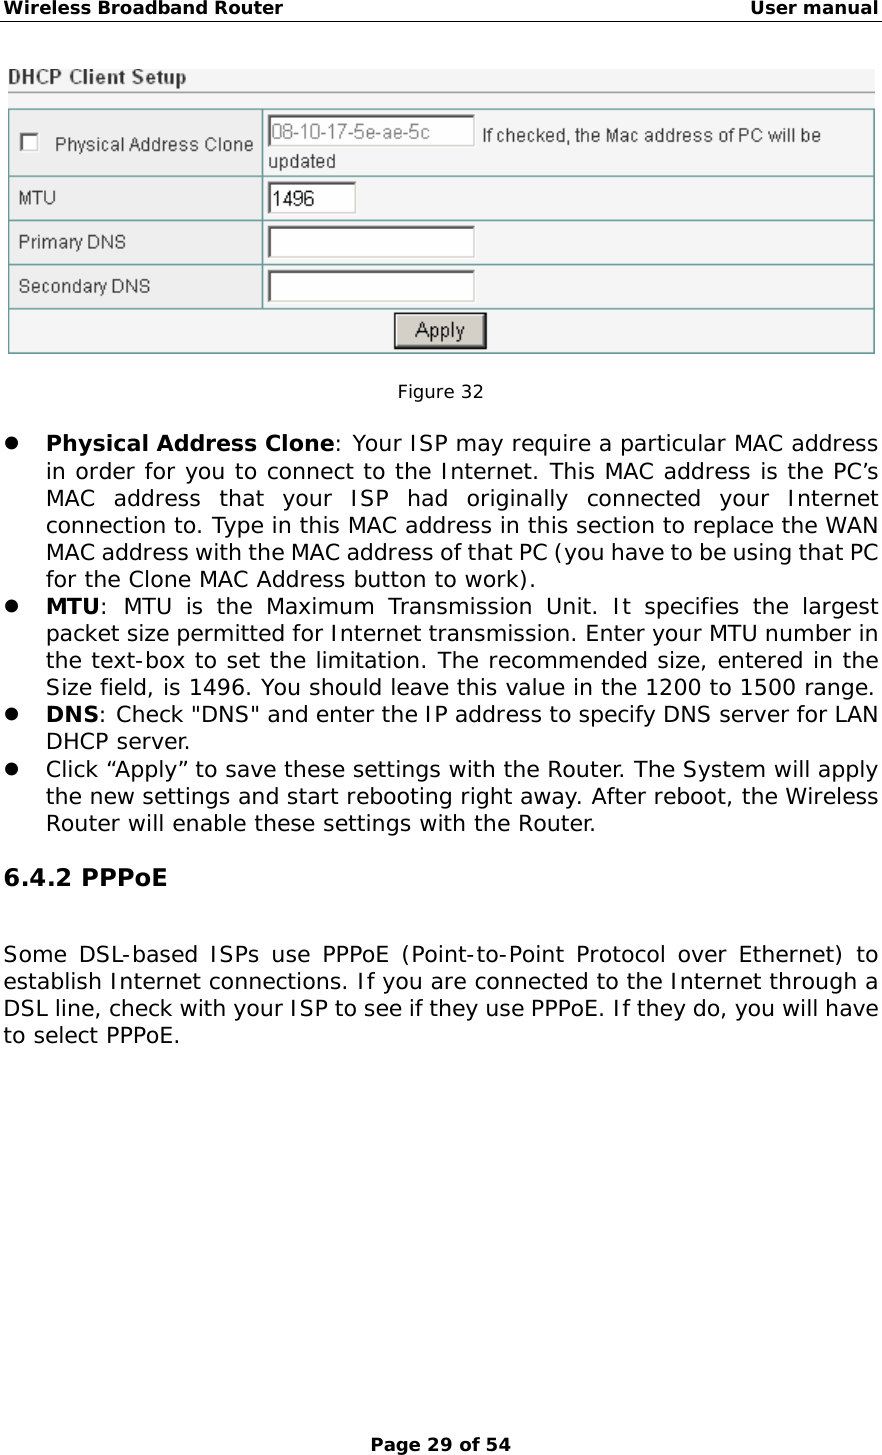 Wireless Broadband Router                                                   User manual Page 29 of 54   Figure 32  z Physical Address Clone: Your ISP may require a particular MAC address in order for you to connect to the Internet. This MAC address is the PC’s MAC address that your ISP had originally connected your Internet connection to. Type in this MAC address in this section to replace the WAN MAC address with the MAC address of that PC (you have to be using that PC for the Clone MAC Address button to work).  z MTU: MTU is the Maximum Transmission Unit. It specifies the largest packet size permitted for Internet transmission. Enter your MTU number in the text-box to set the limitation. The recommended size, entered in the Size field, is 1496. You should leave this value in the 1200 to 1500 range. z DNS: Check &quot;DNS&quot; and enter the IP address to specify DNS server for LAN DHCP server. z Click “Apply” to save these settings with the Router. The System will apply the new settings and start rebooting right away. After reboot, the Wireless Router will enable these settings with the Router. 6.4.2 PPPoE Some DSL-based ISPs use PPPoE (Point-to-Point Protocol over Ethernet) to establish Internet connections. If you are connected to the Internet through a DSL line, check with your ISP to see if they use PPPoE. If they do, you will have to select PPPoE. 